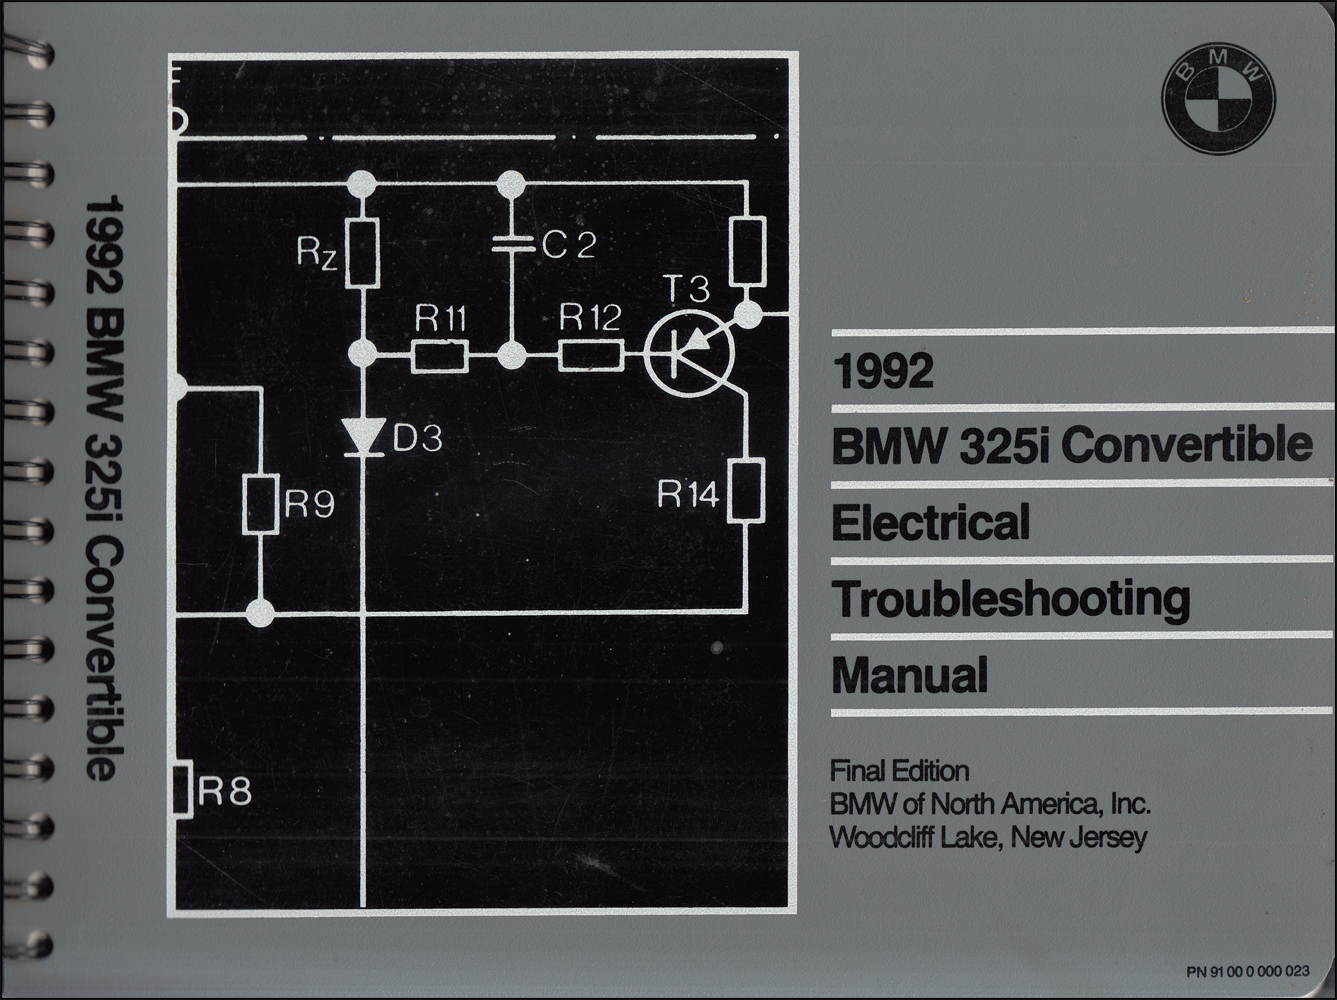 1992 BMW 325i Convertible Electrical Troubleshooting Manual